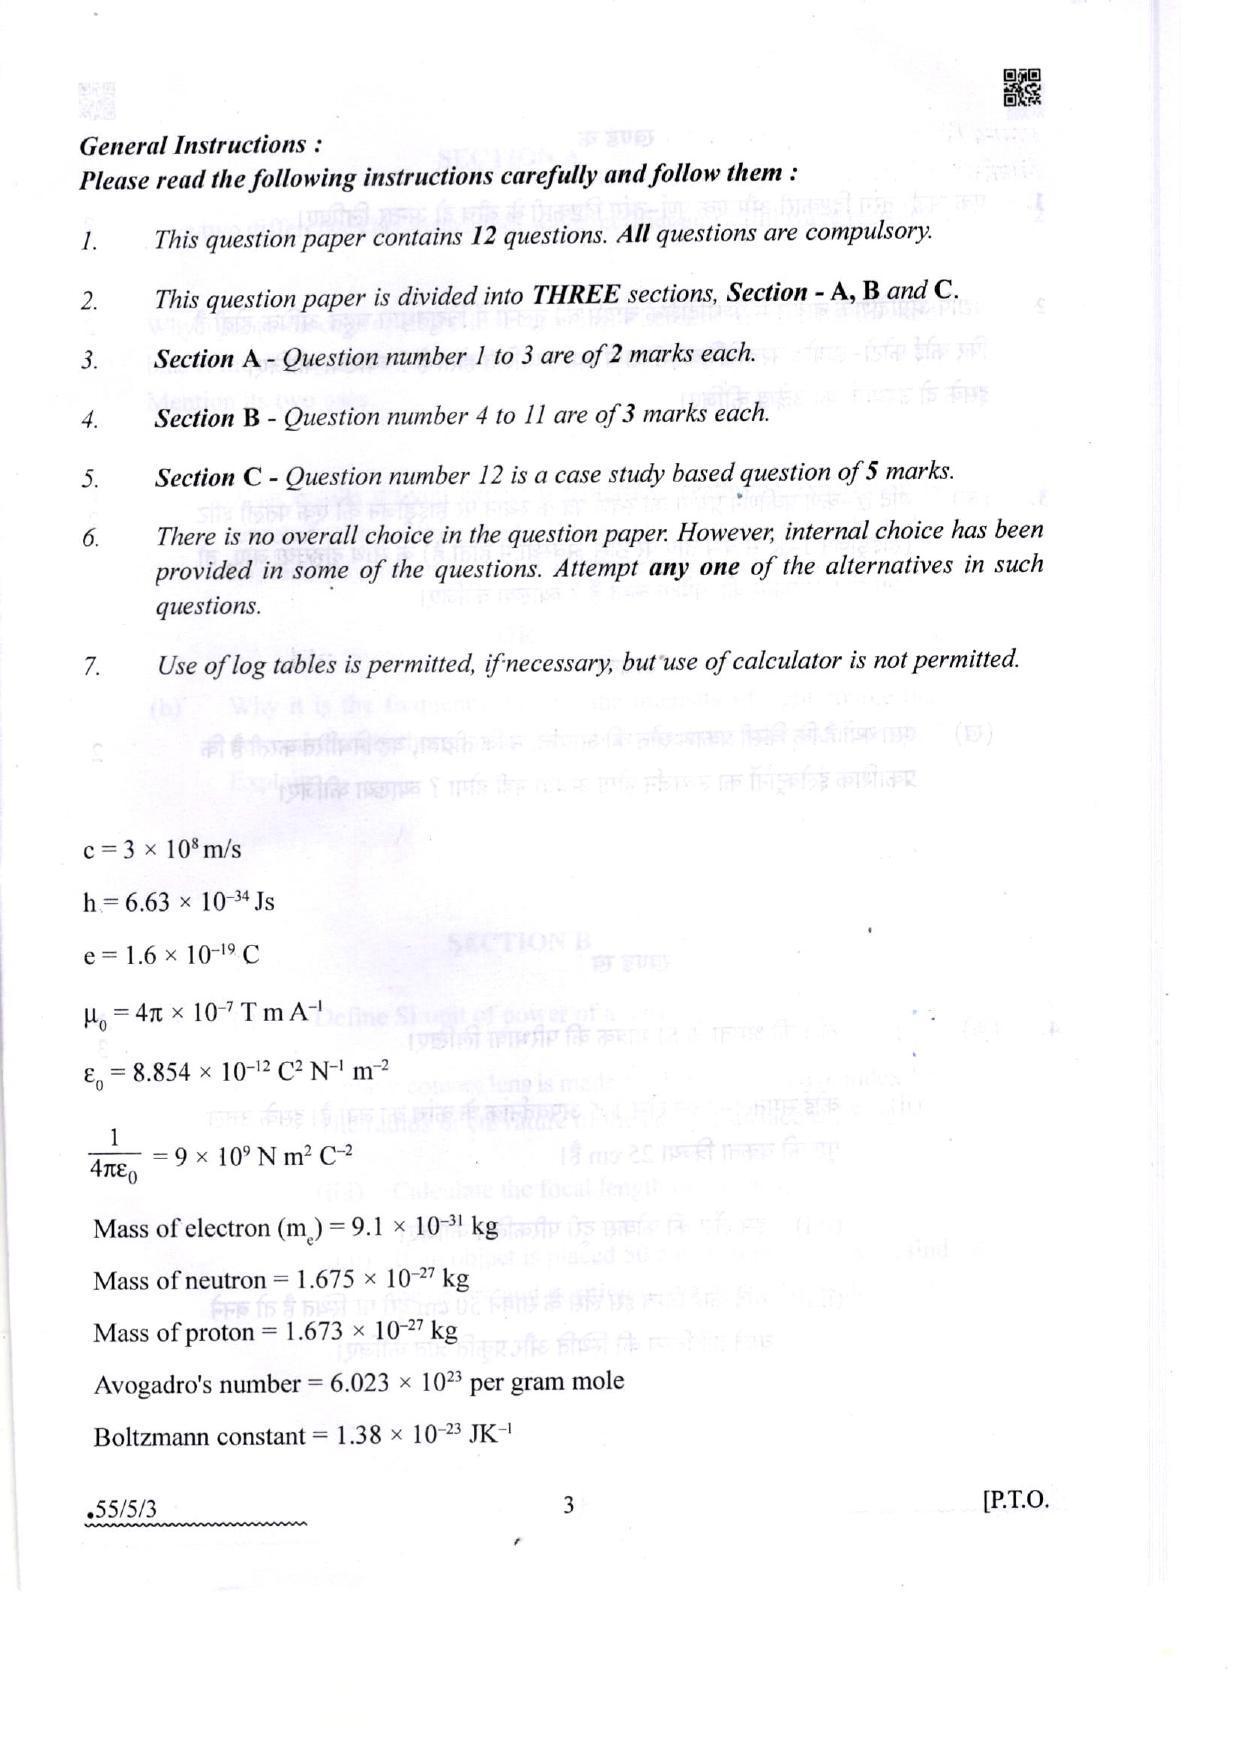 CBSE Class 12 55-5-3 Physics 2022 Question Paper - Page 3